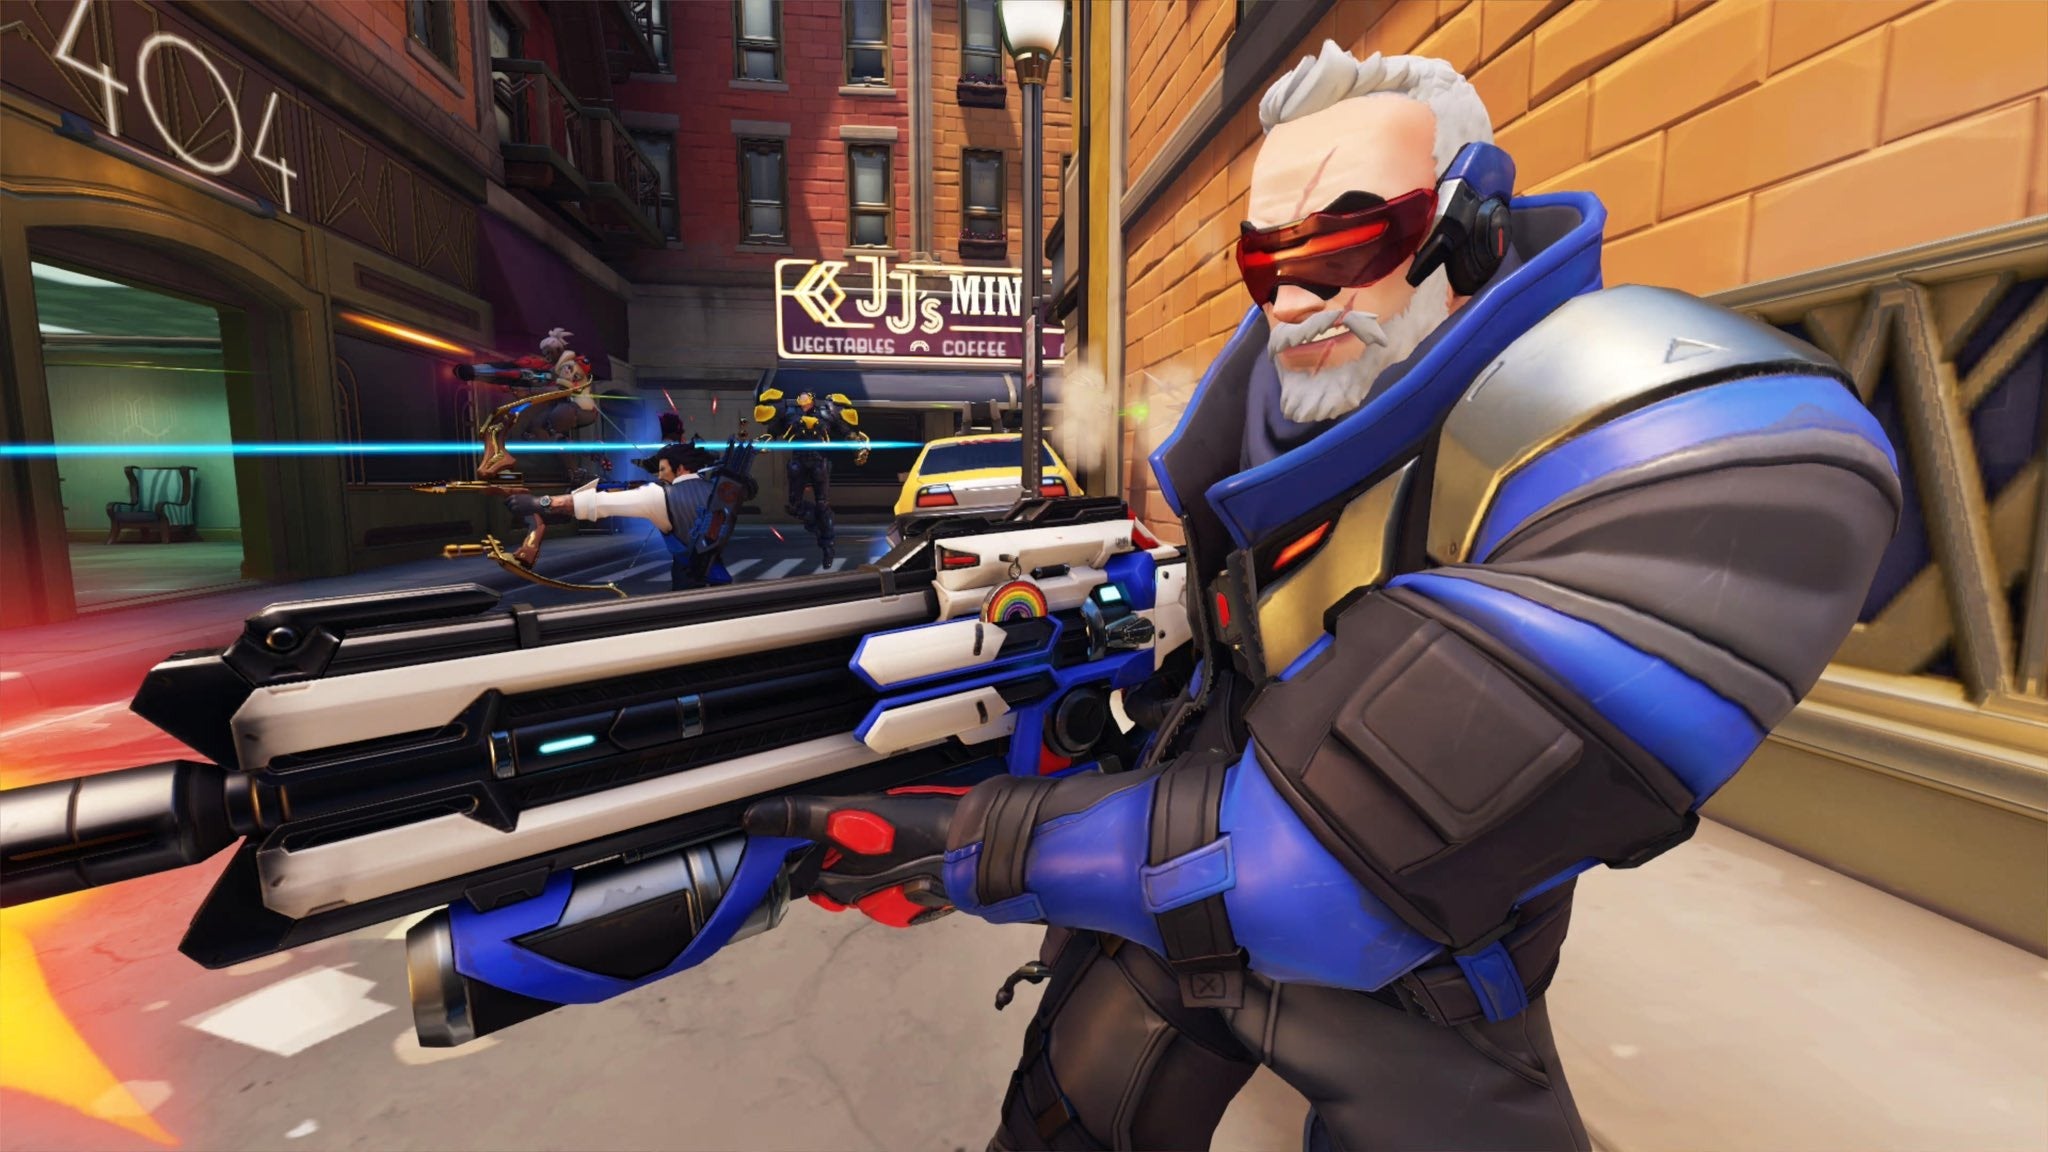 Overwatch 2 is still only half the game Blizzard promised, but its PvP suite is still pretty damn great. (Screenshot: Blizzard Entertainment / Kotaku)